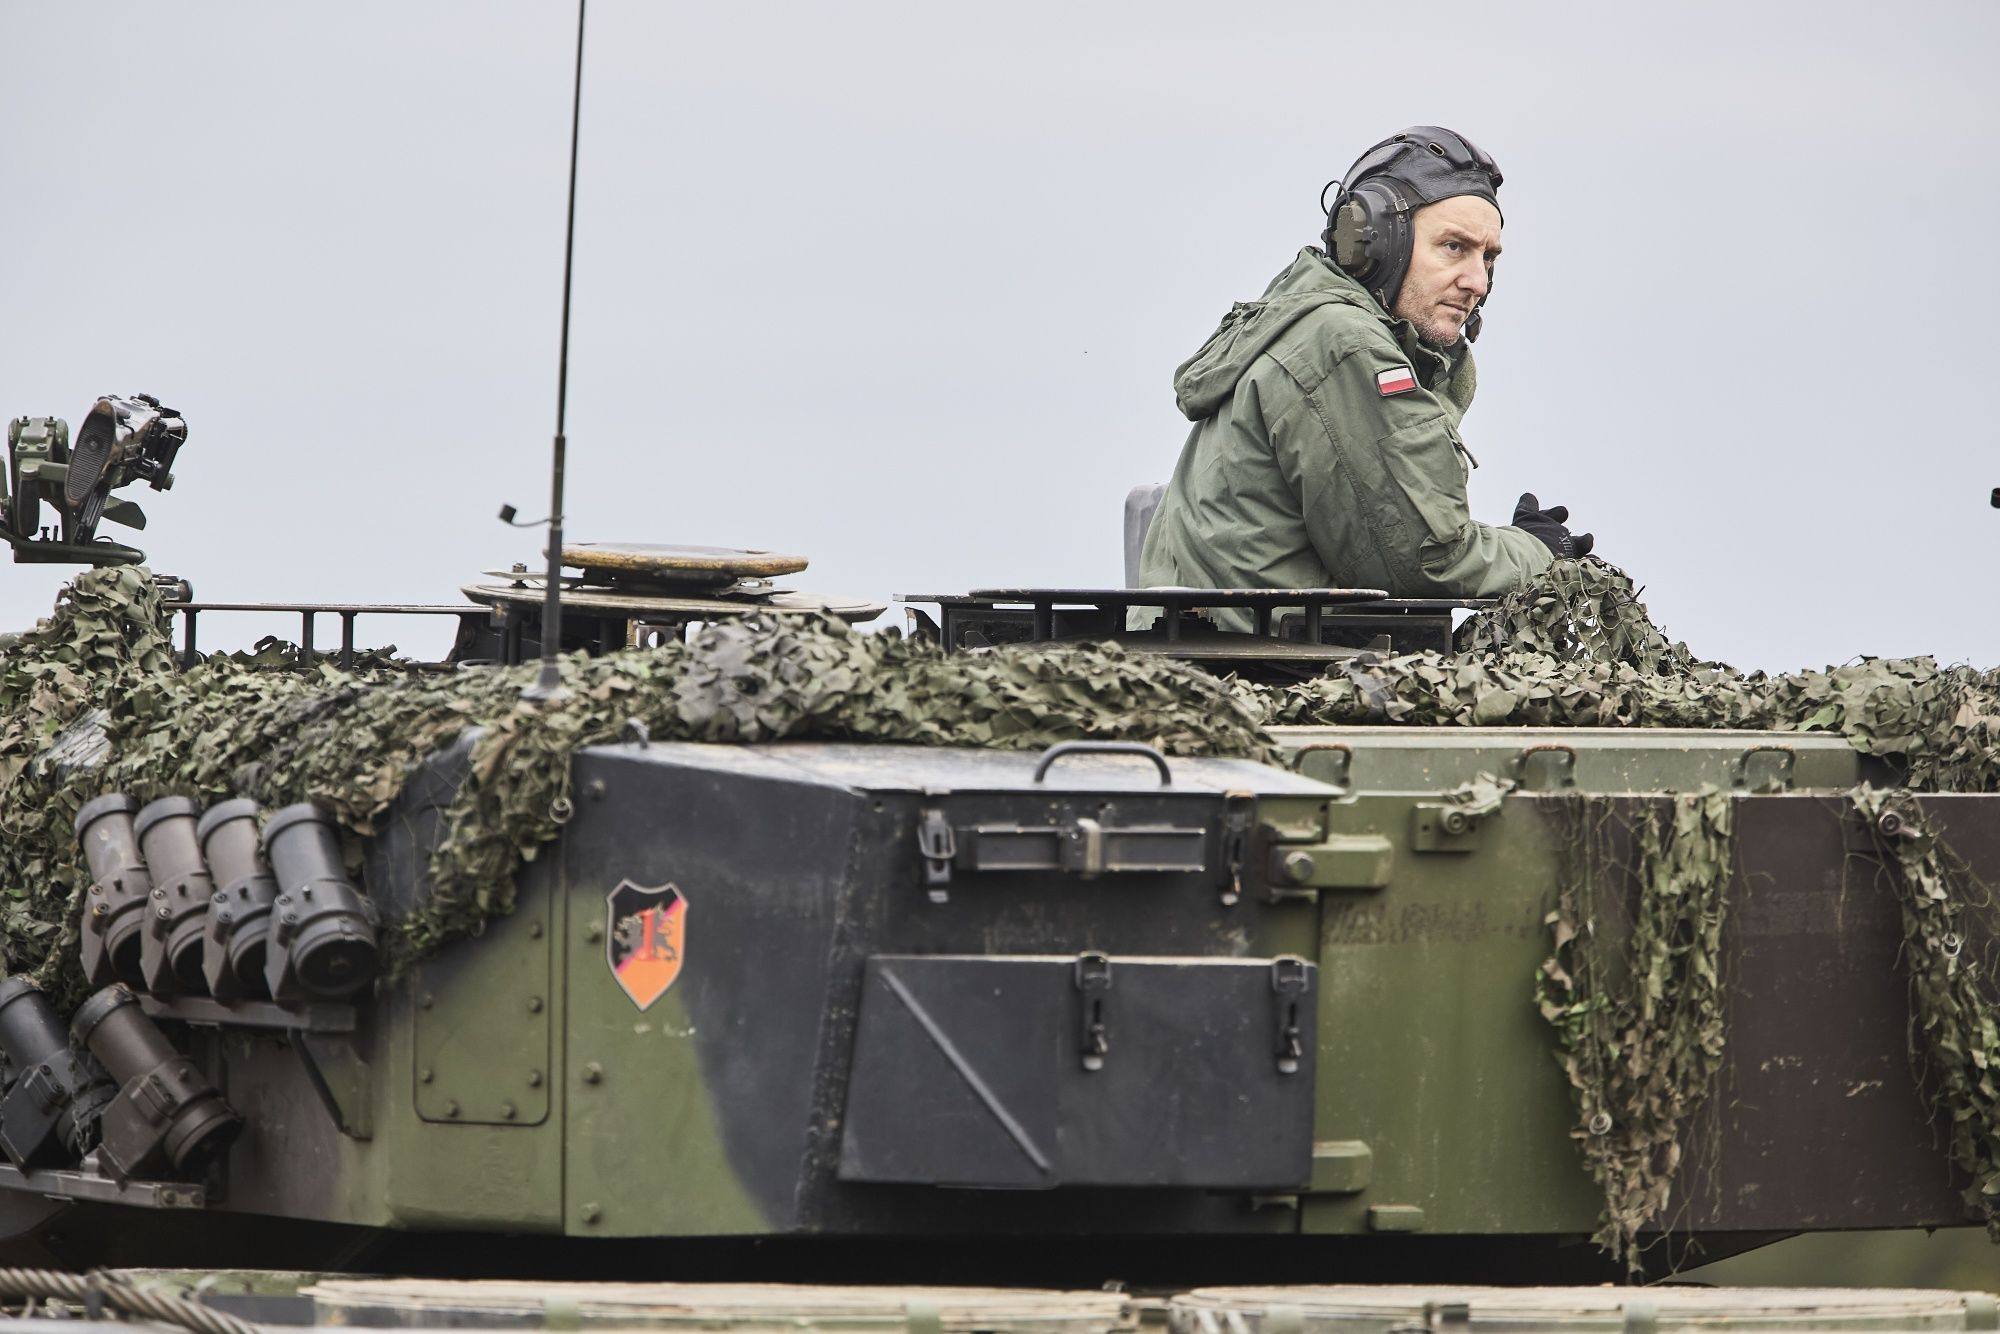 A Ukrainian army soldier, wearing Polish army uniform, in a Leopard 2 A4 tank during an exercise at the Swietoszow Tank Training Center in Swietoszow, Poland, in February 2023. Photo: Bloomberg